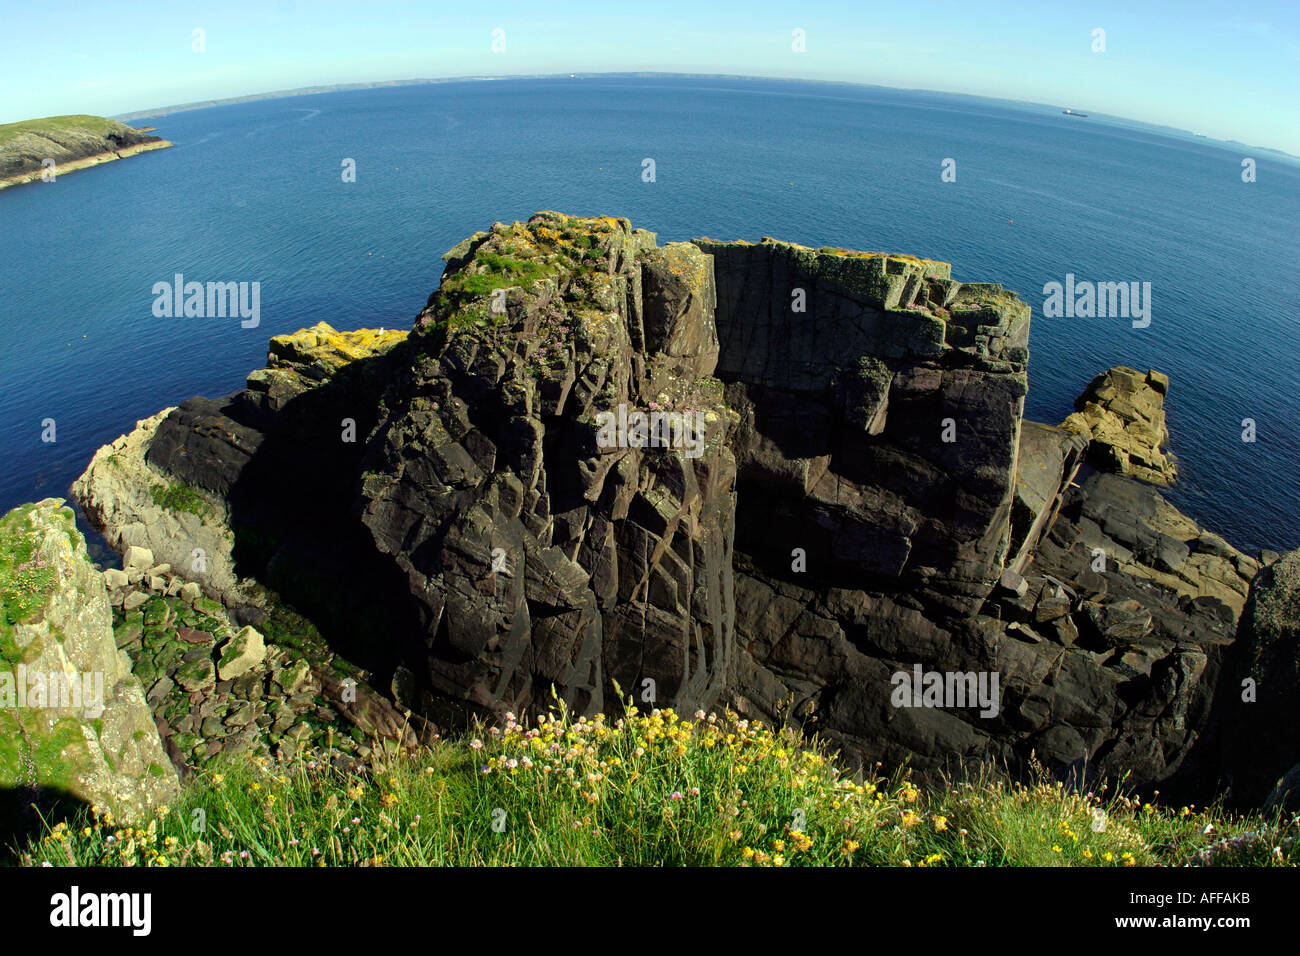 St Non s bay cliffs well known for rock climbing Pembrokeshire West  Wales st nons bay birthplace of st david dewi sant Stock Photo